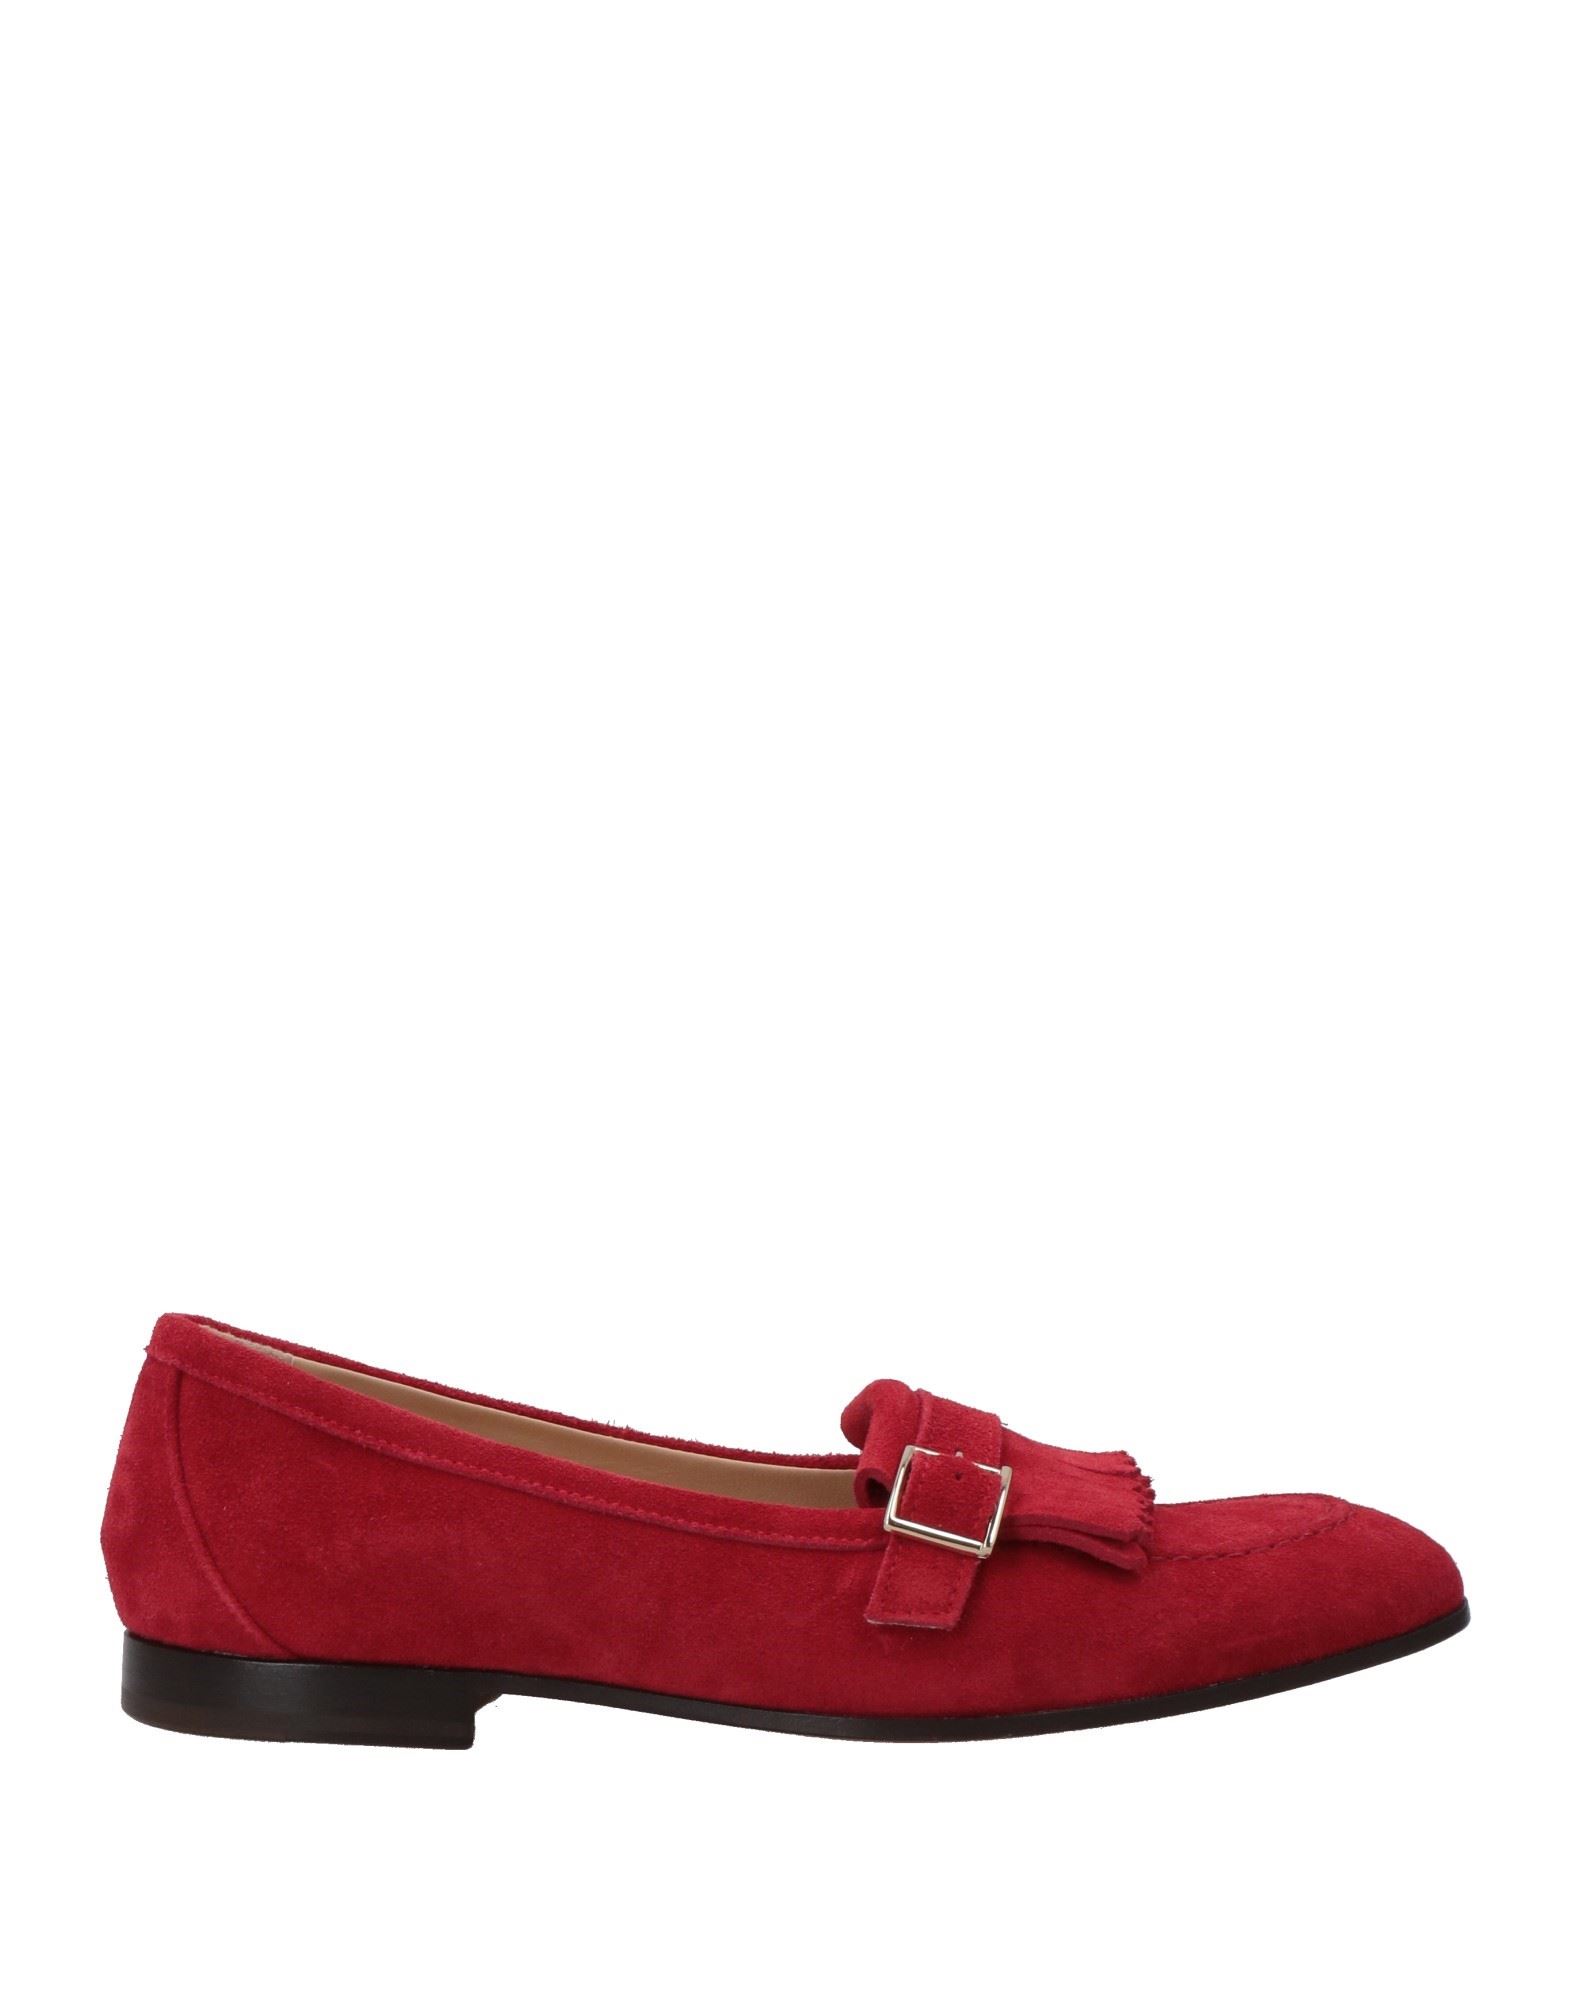 Doucal's Woman Loafers Red Size 10 Soft Leather